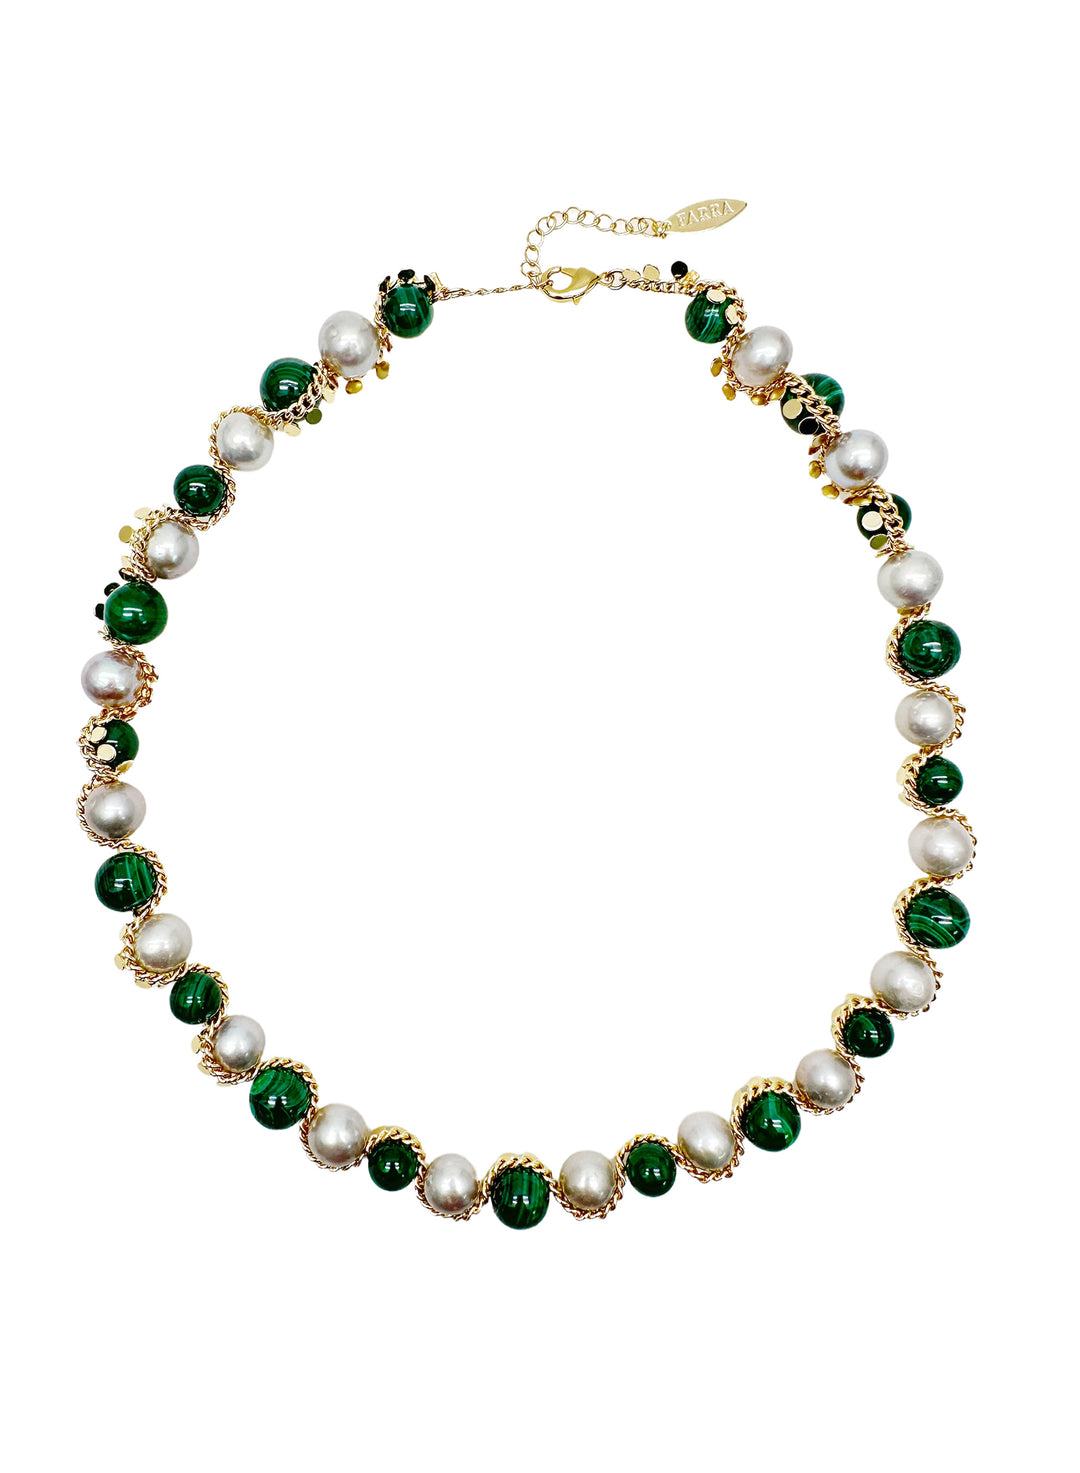 Green Malachite with Gray Freshwater Pearls Statement Necklace LN041 - FARRA